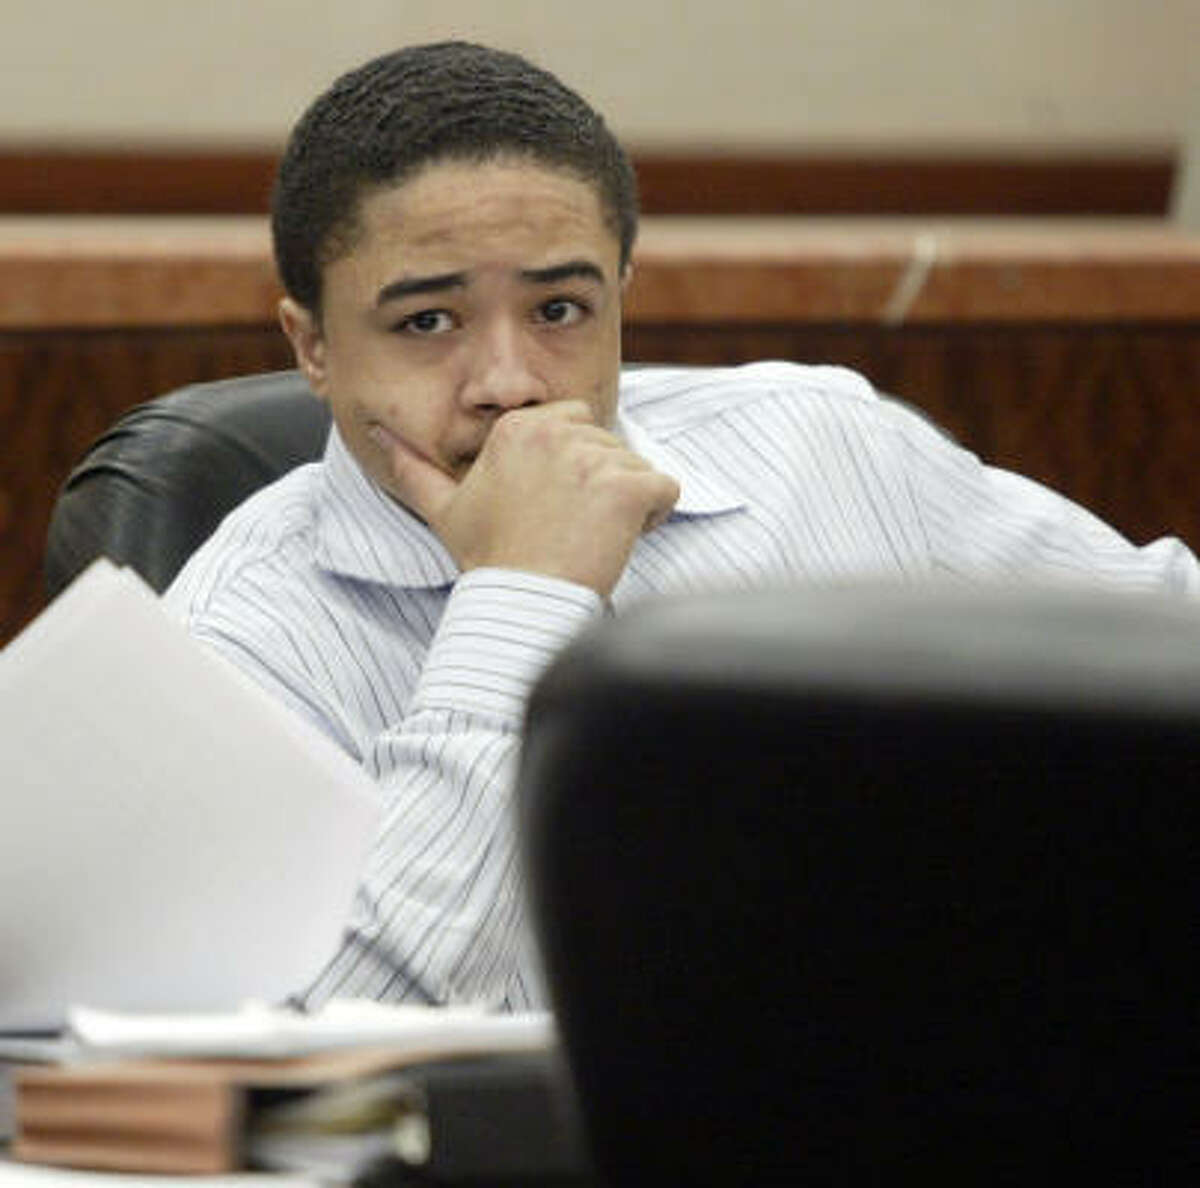 Dexter Johnson, 19, sits at a table during his trial June 13 in the 208th District Court of the Harris County Criminal Courthouse in Houston.